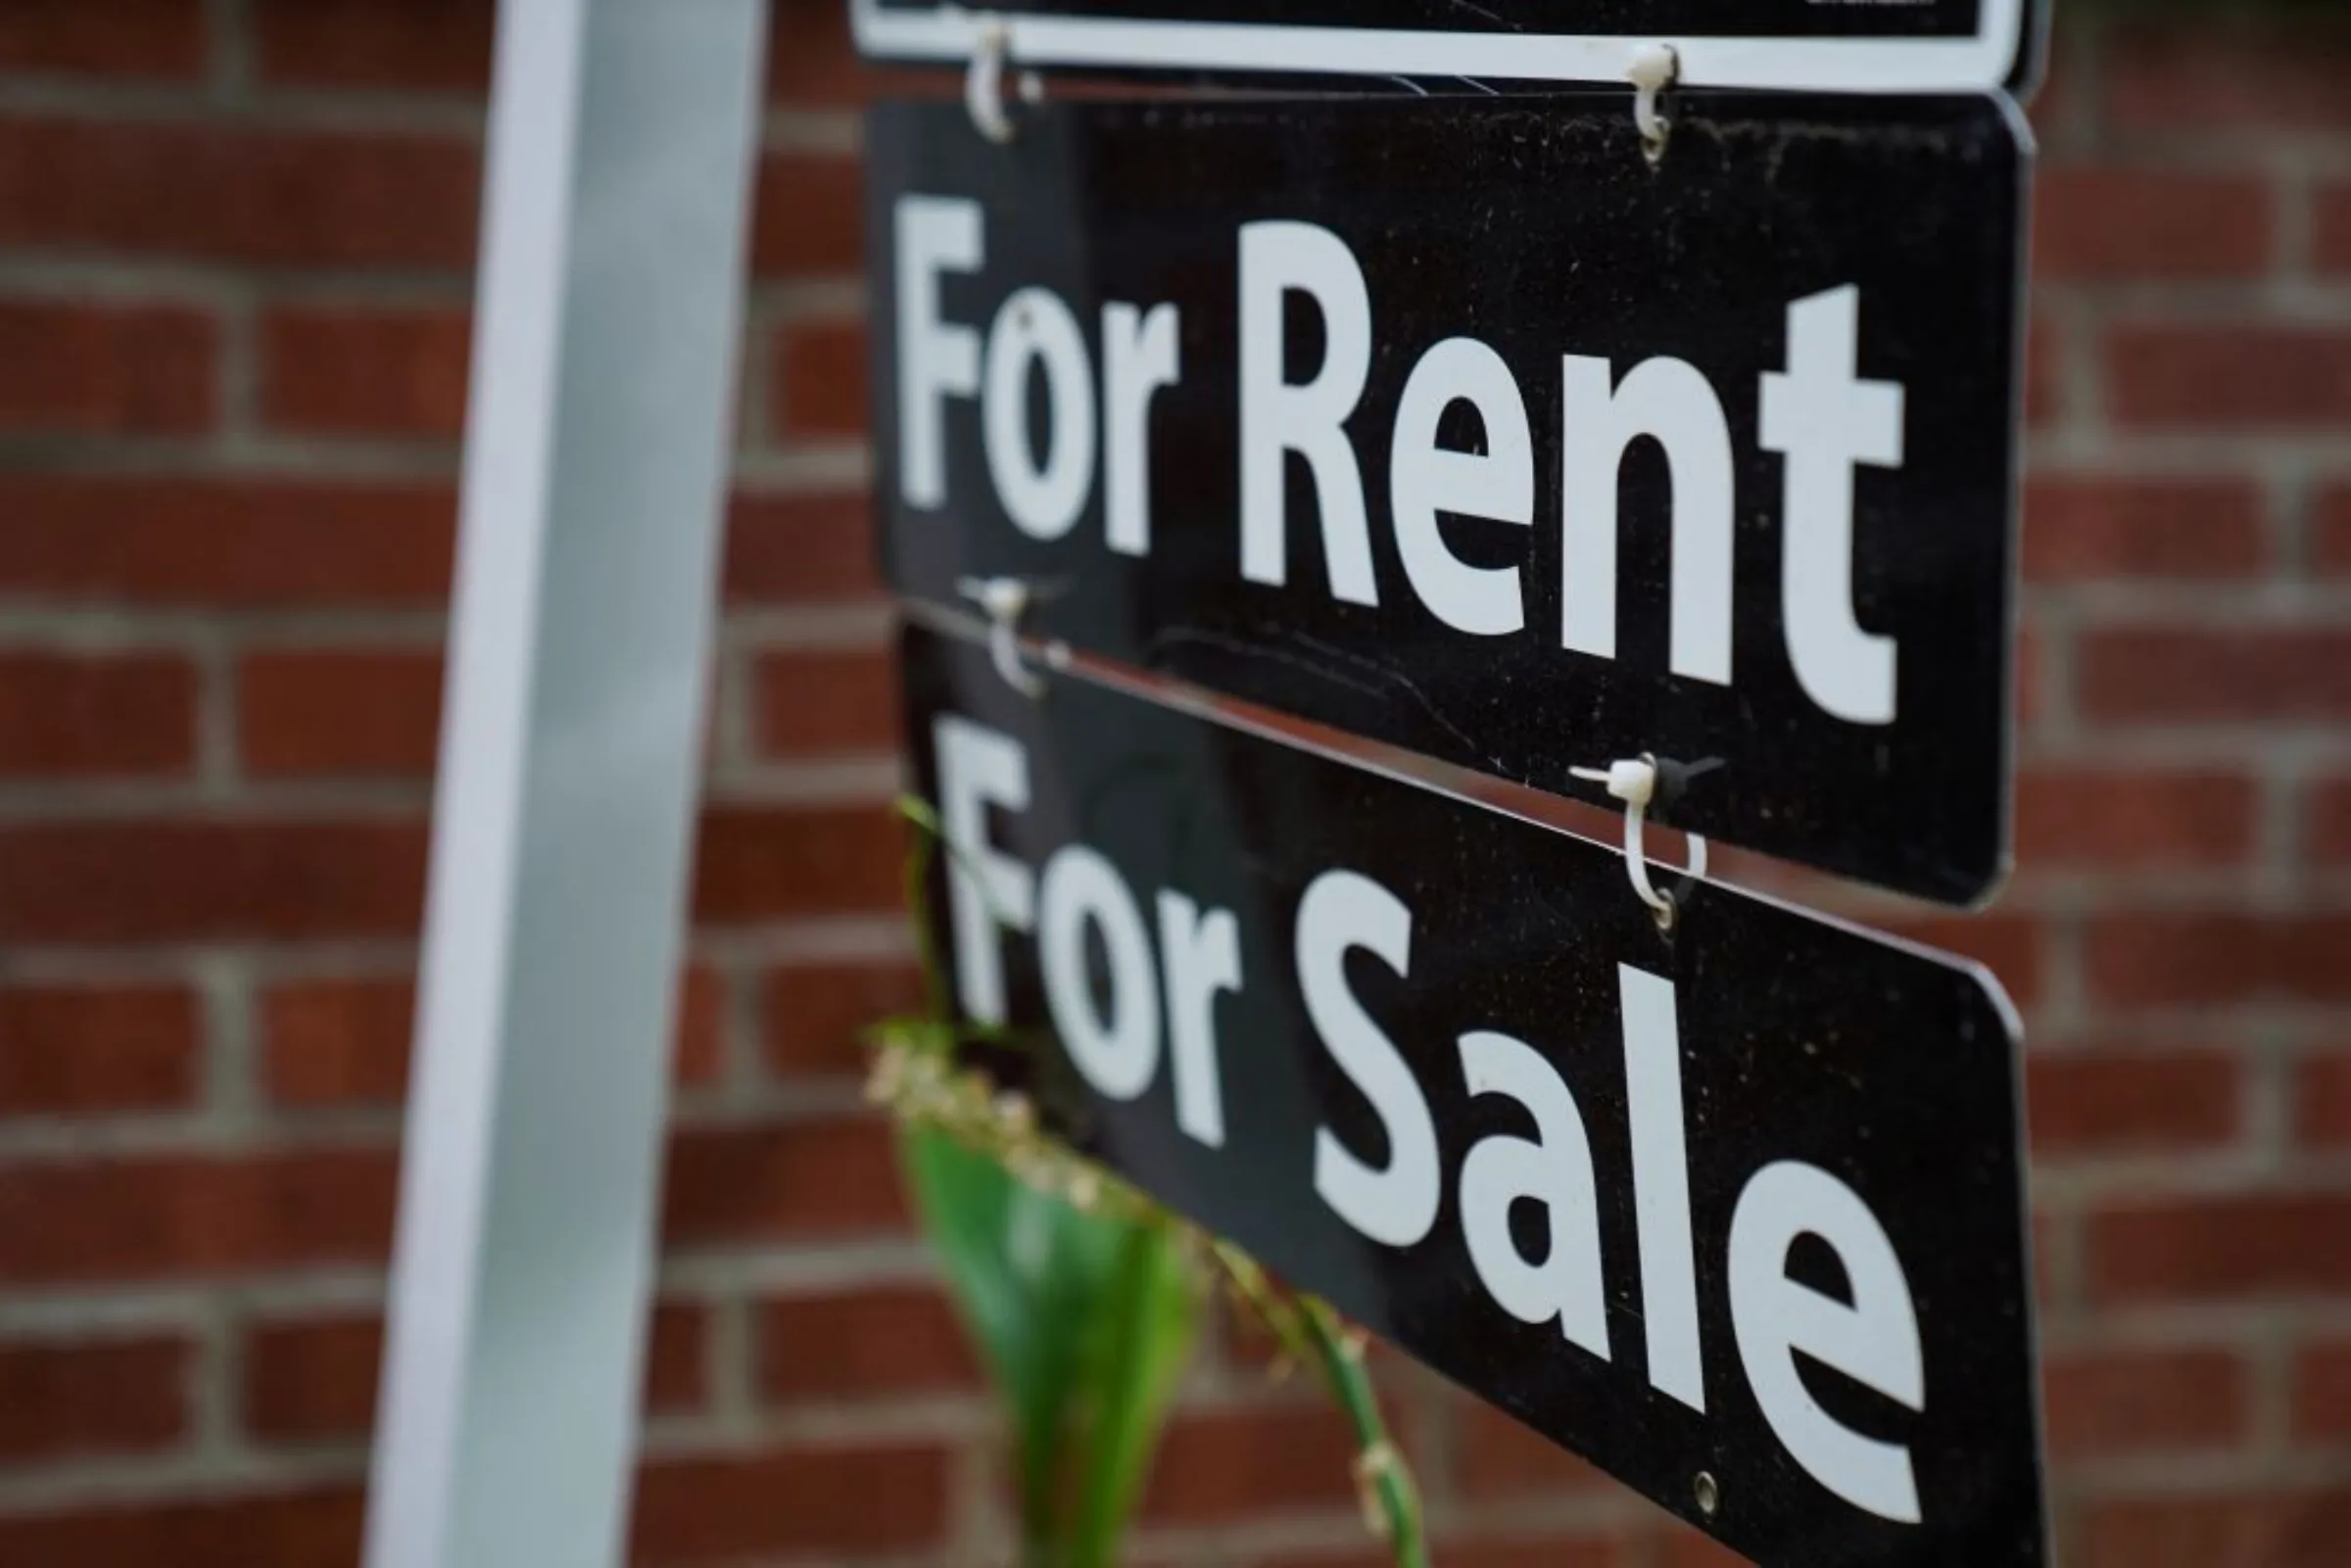 A 'For Rent, For Sale' sign is seen outside of a home in Washington, U.S., July 7, 2022